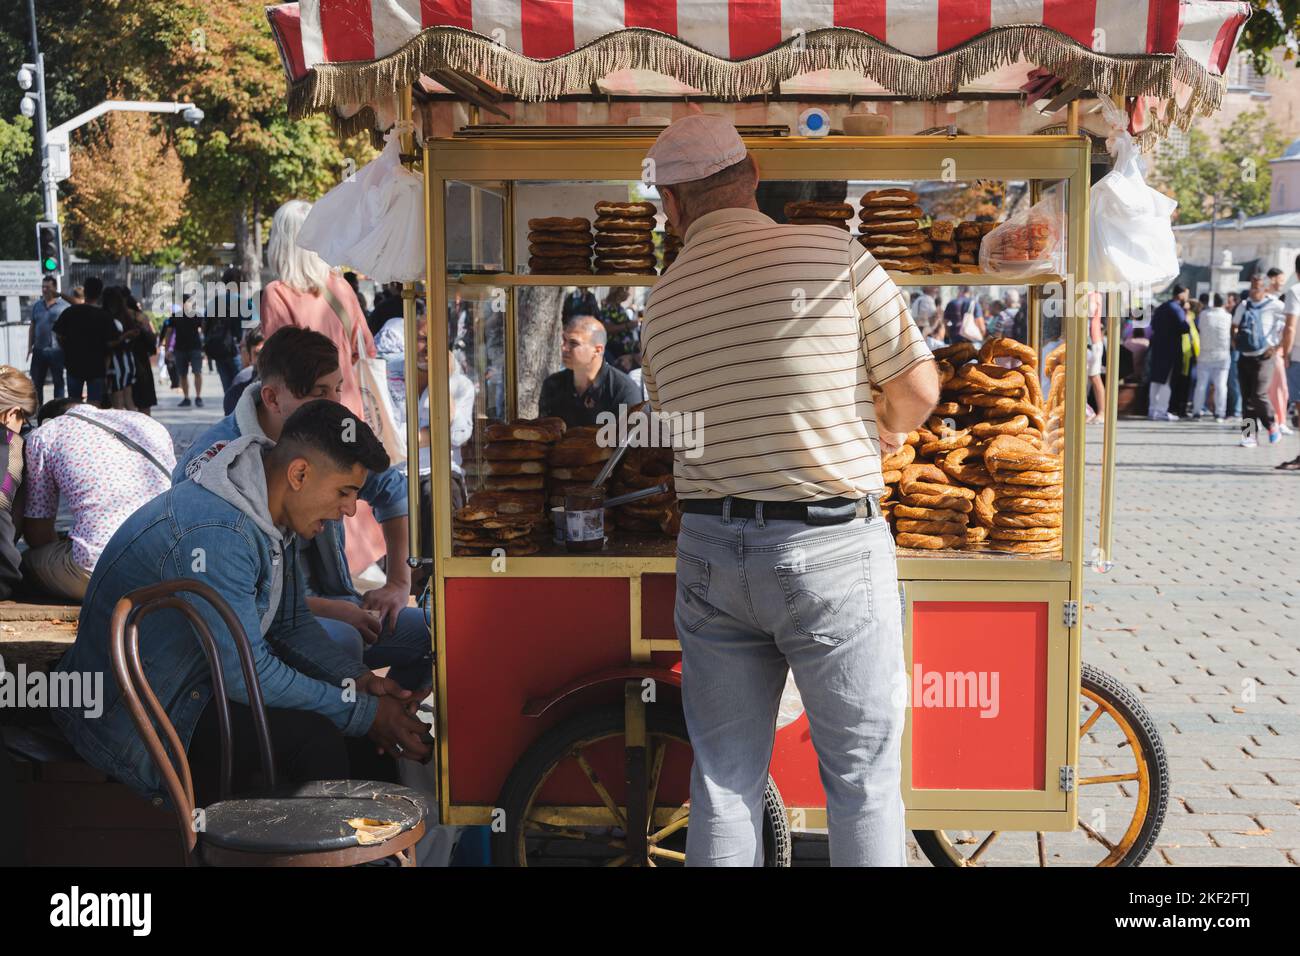 Istanbul, Turkey - October 1 2022: A traditional Turkish street vendor in the tourist district of Sultanahmet sells pretzels out of a food stand in Is Stock Photo